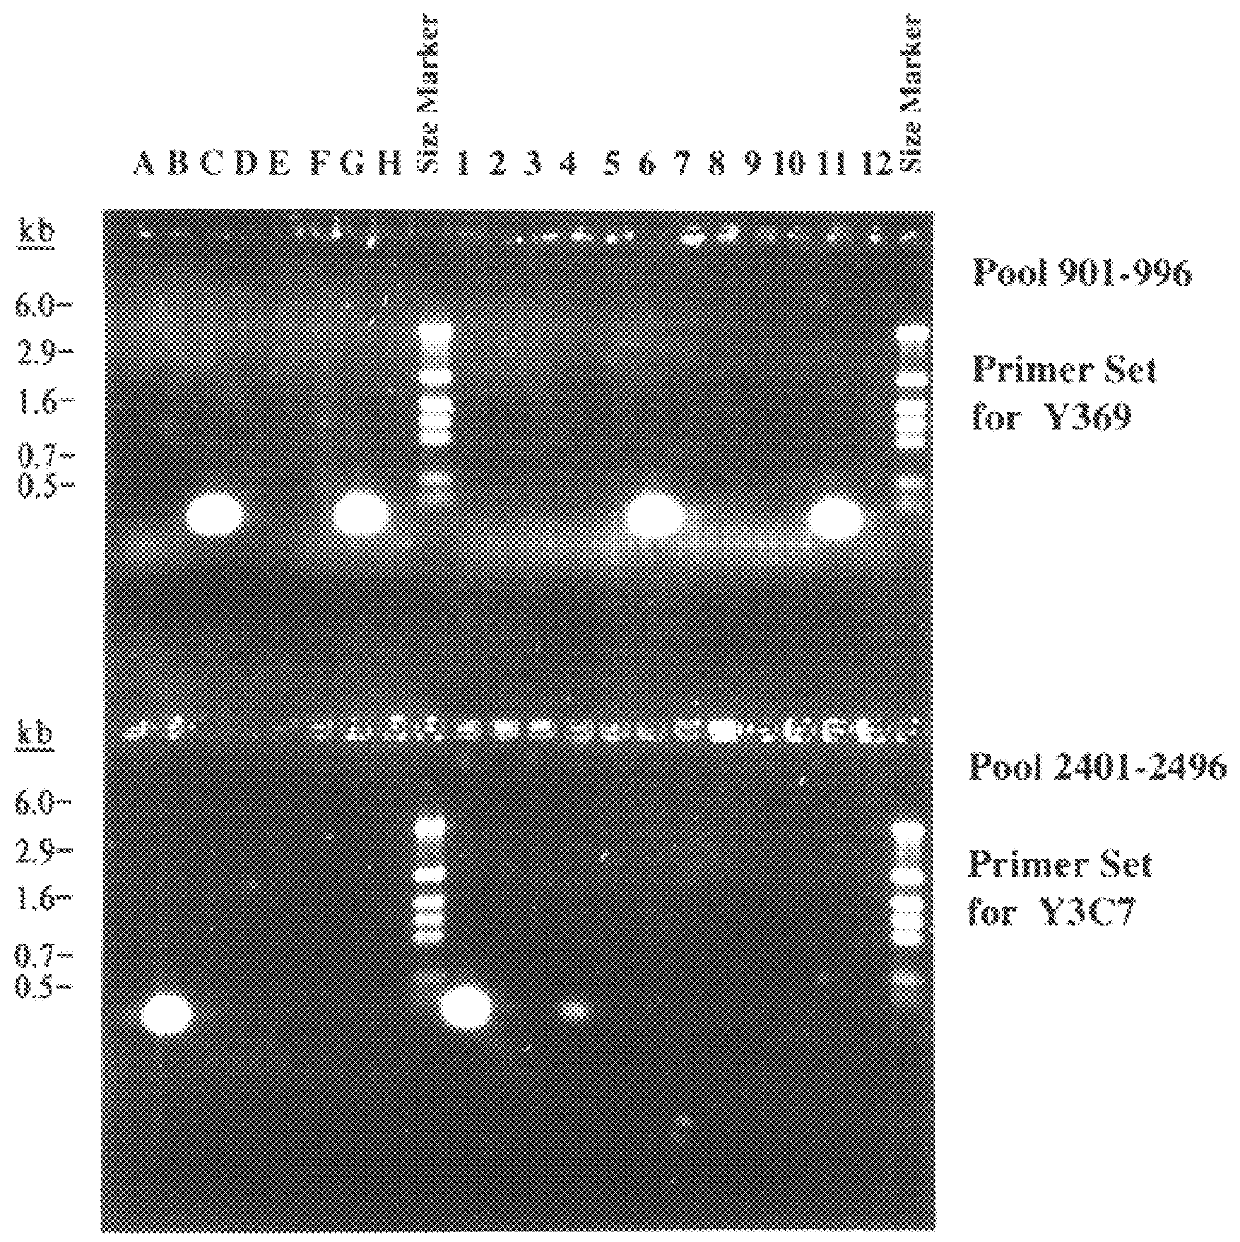 Method for isolating a polynucleotide of interest from the genome of a mycobacterium using a BAC-based DNA library application to the detection of mycobacteria